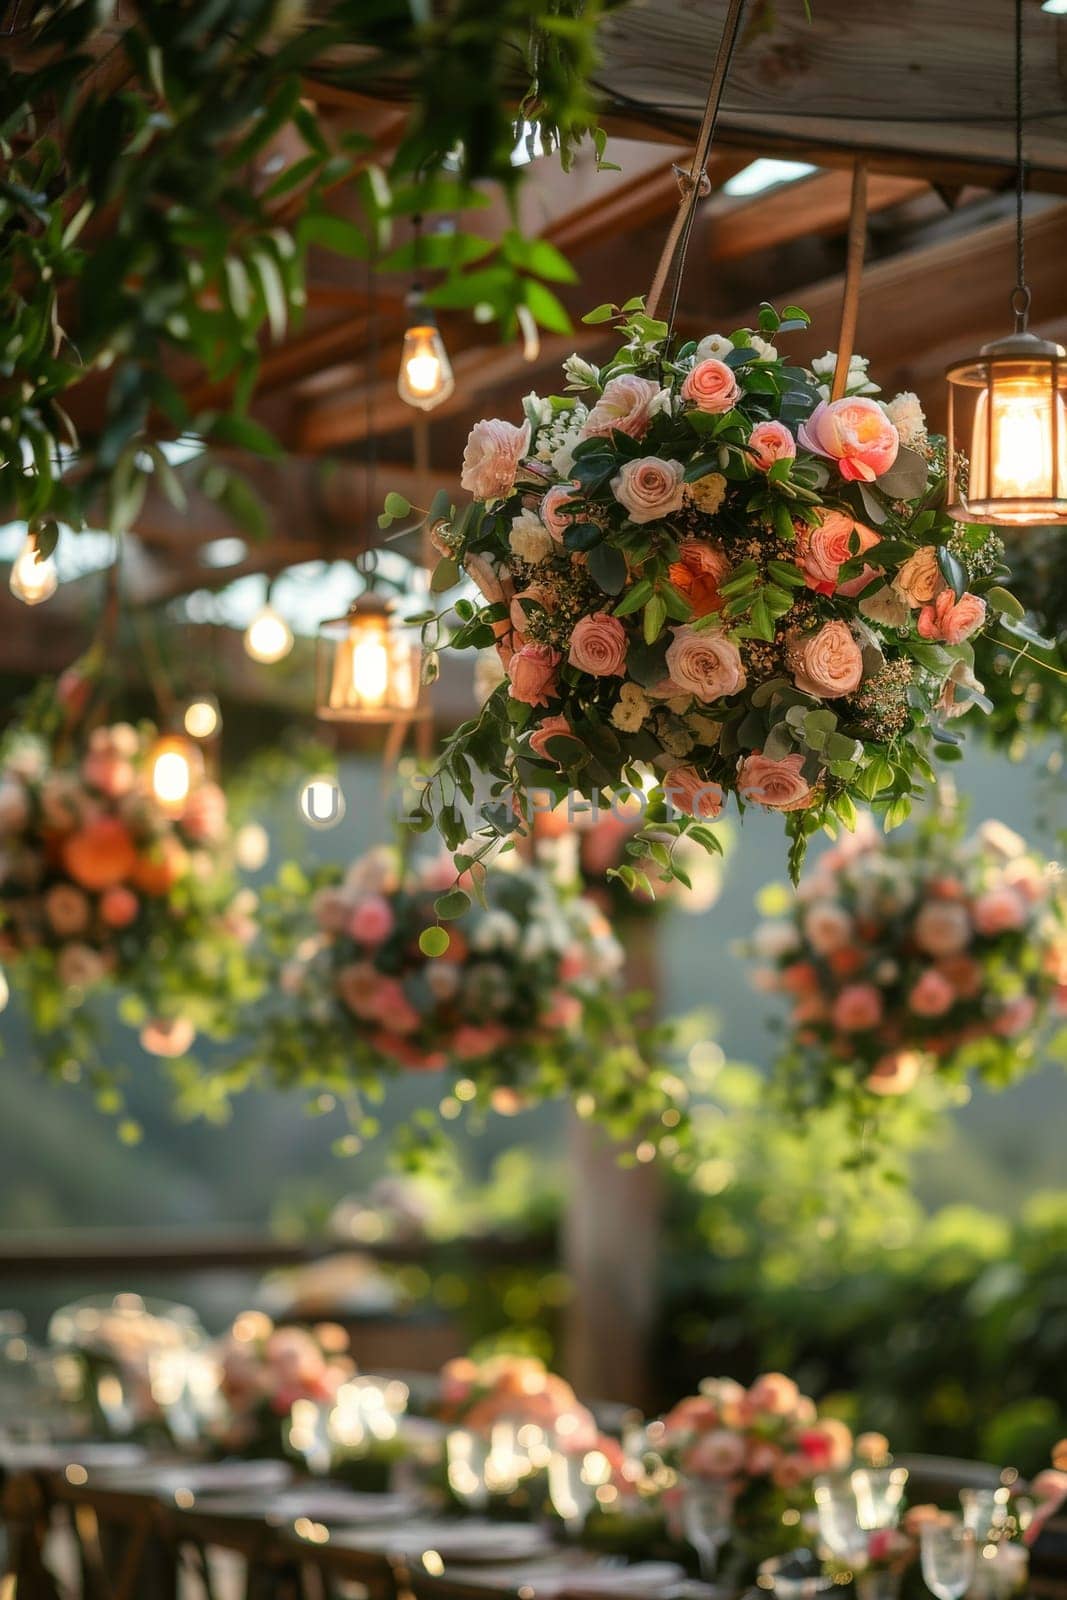 A table with a floral centerpiece and a bunch of lights hanging from the ceiling. Scene is warm and inviting